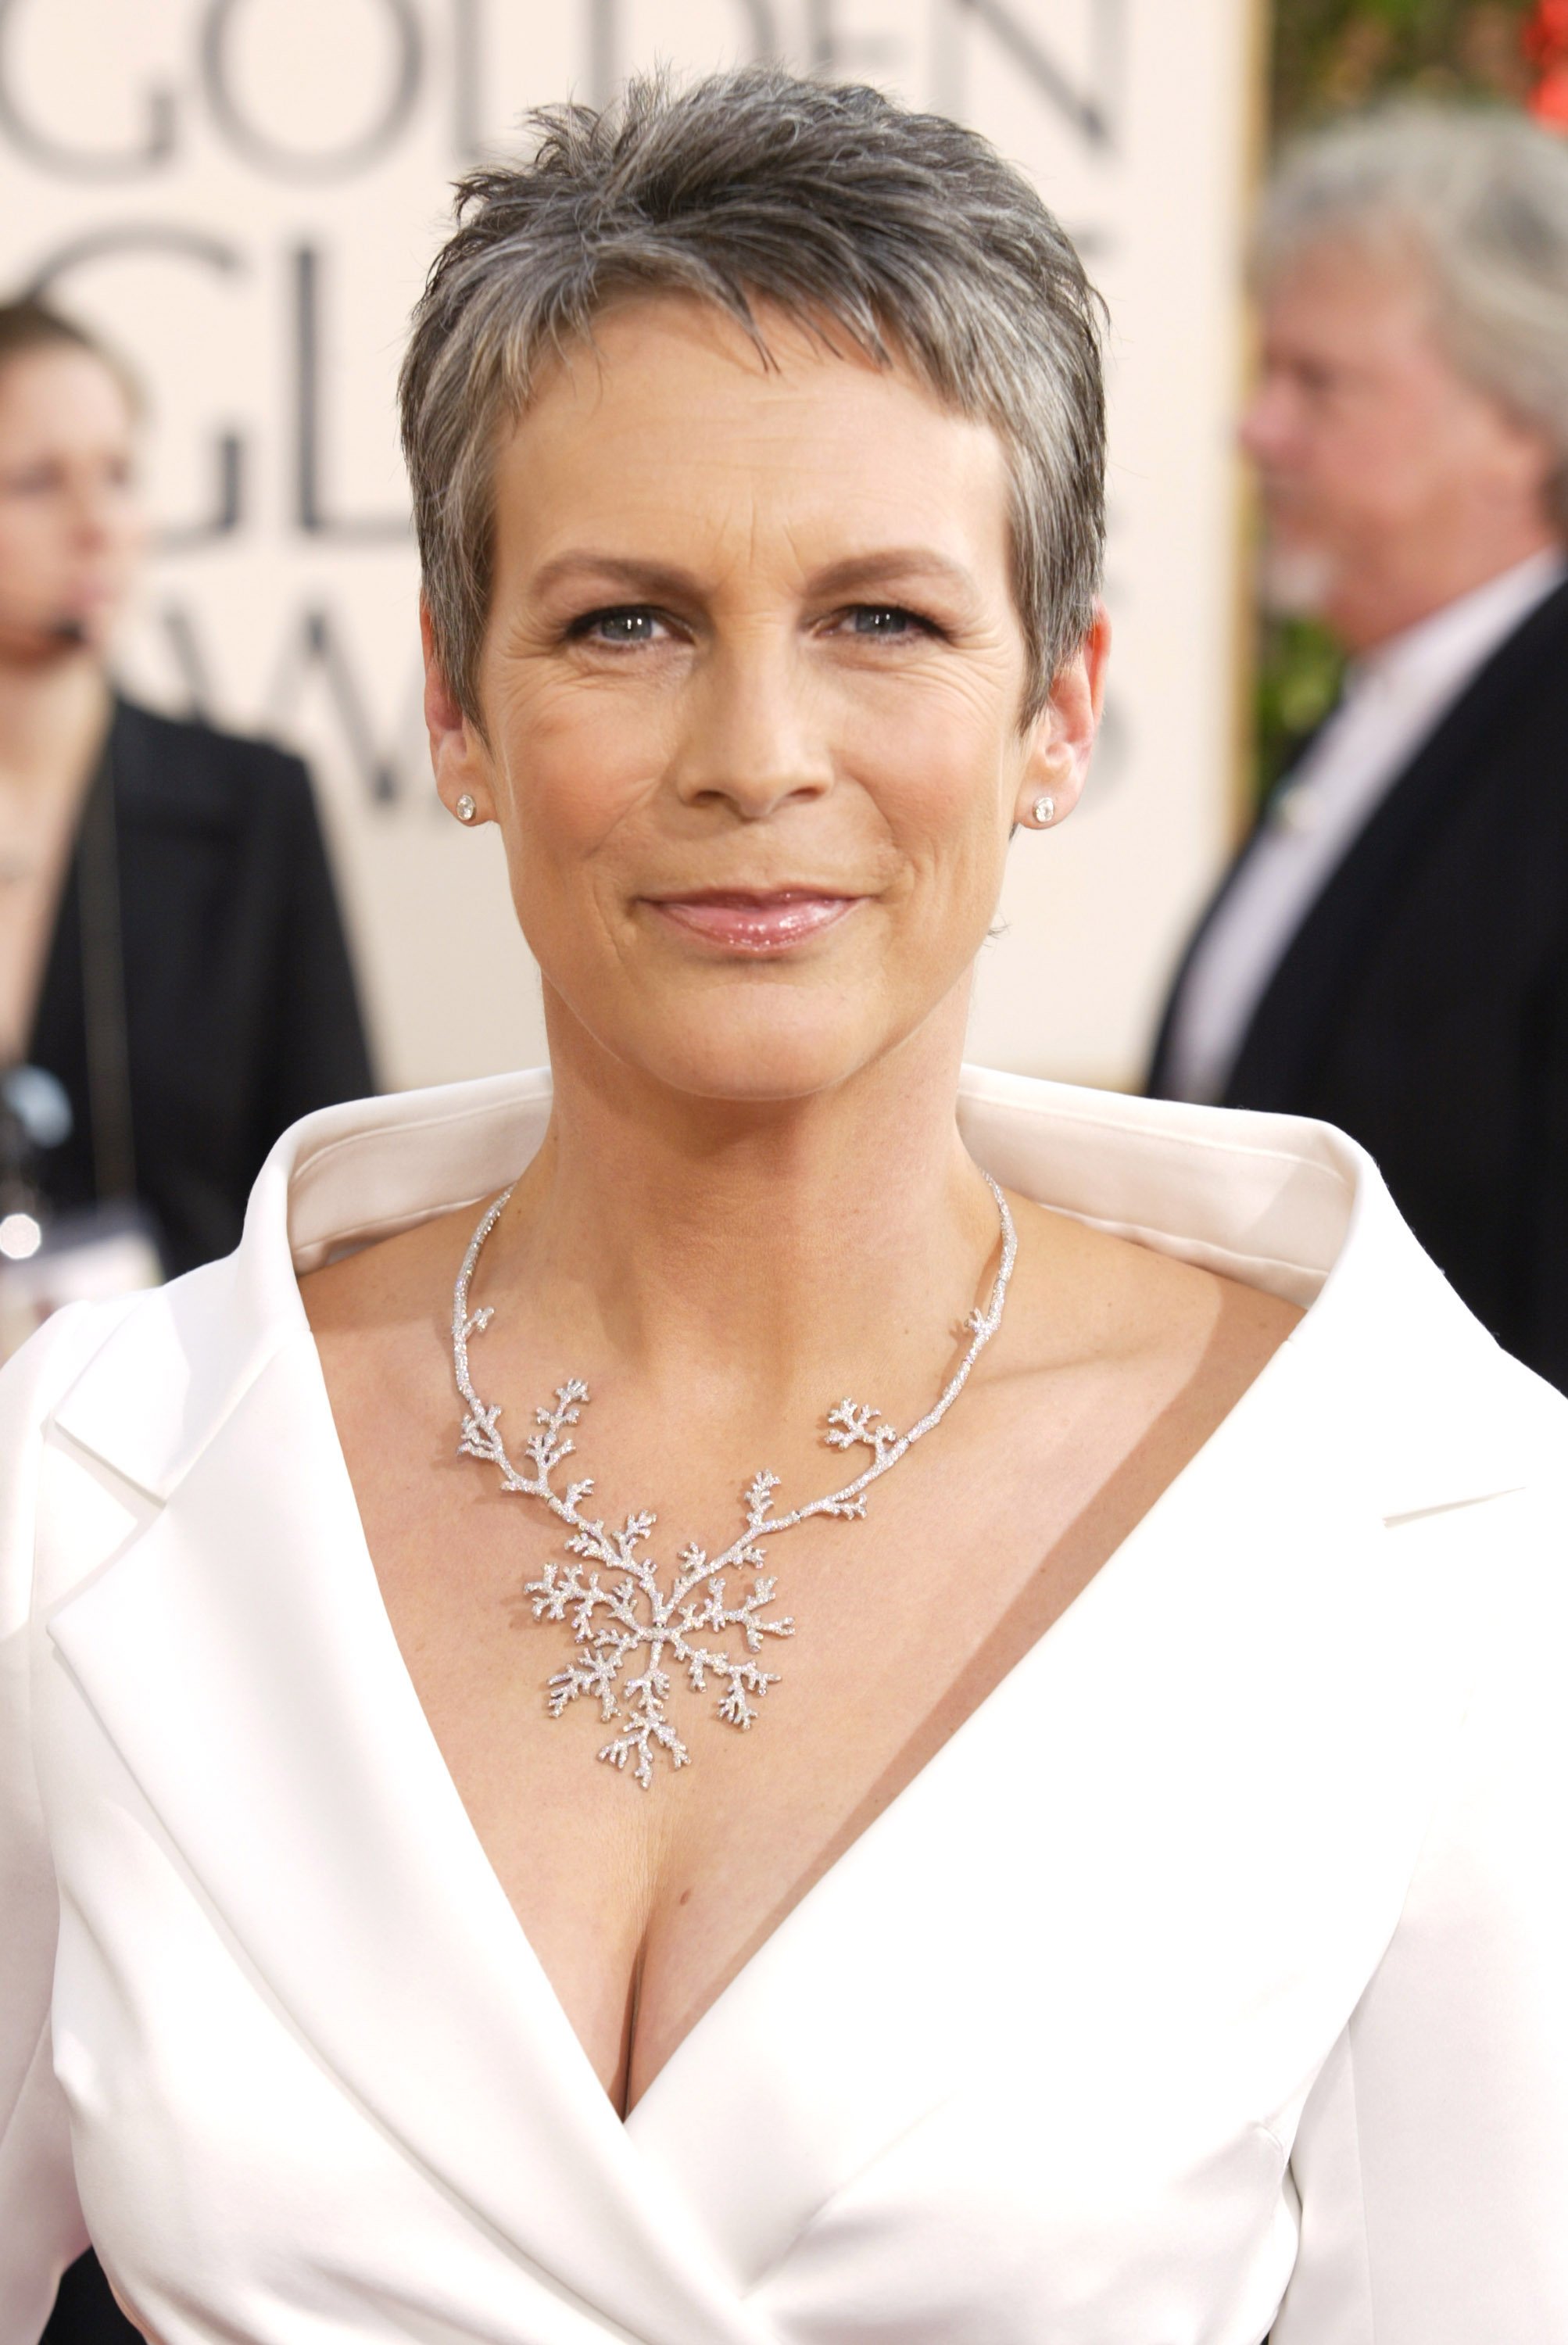 Jamie Lee Curtis during The 61st Annual Golden Globe Awards  | Source: Getty Images